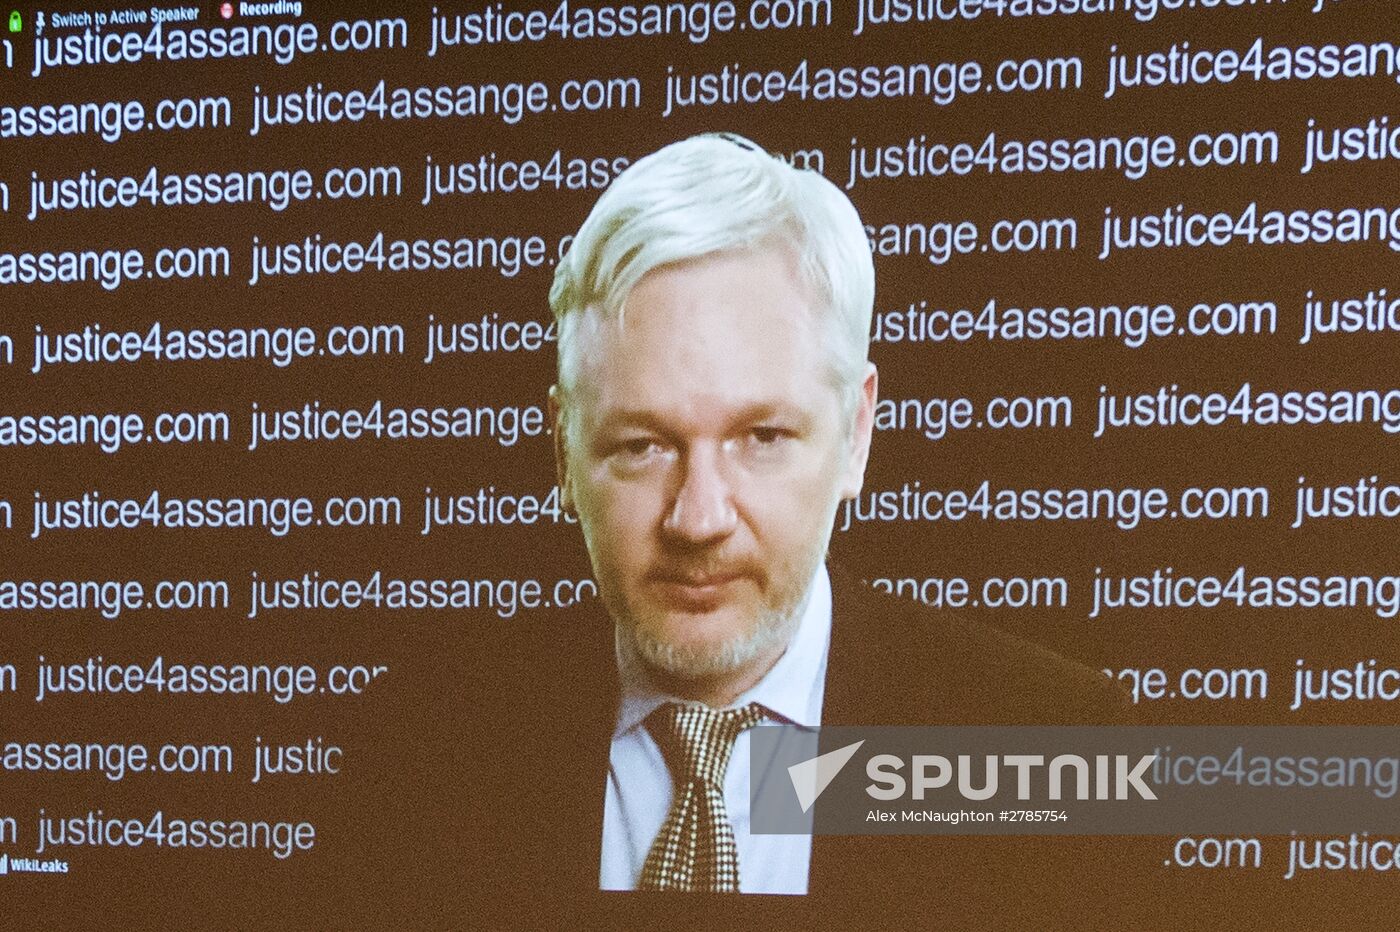 Julian Assange gives press conference over a video link from Ecuador Embassy in London